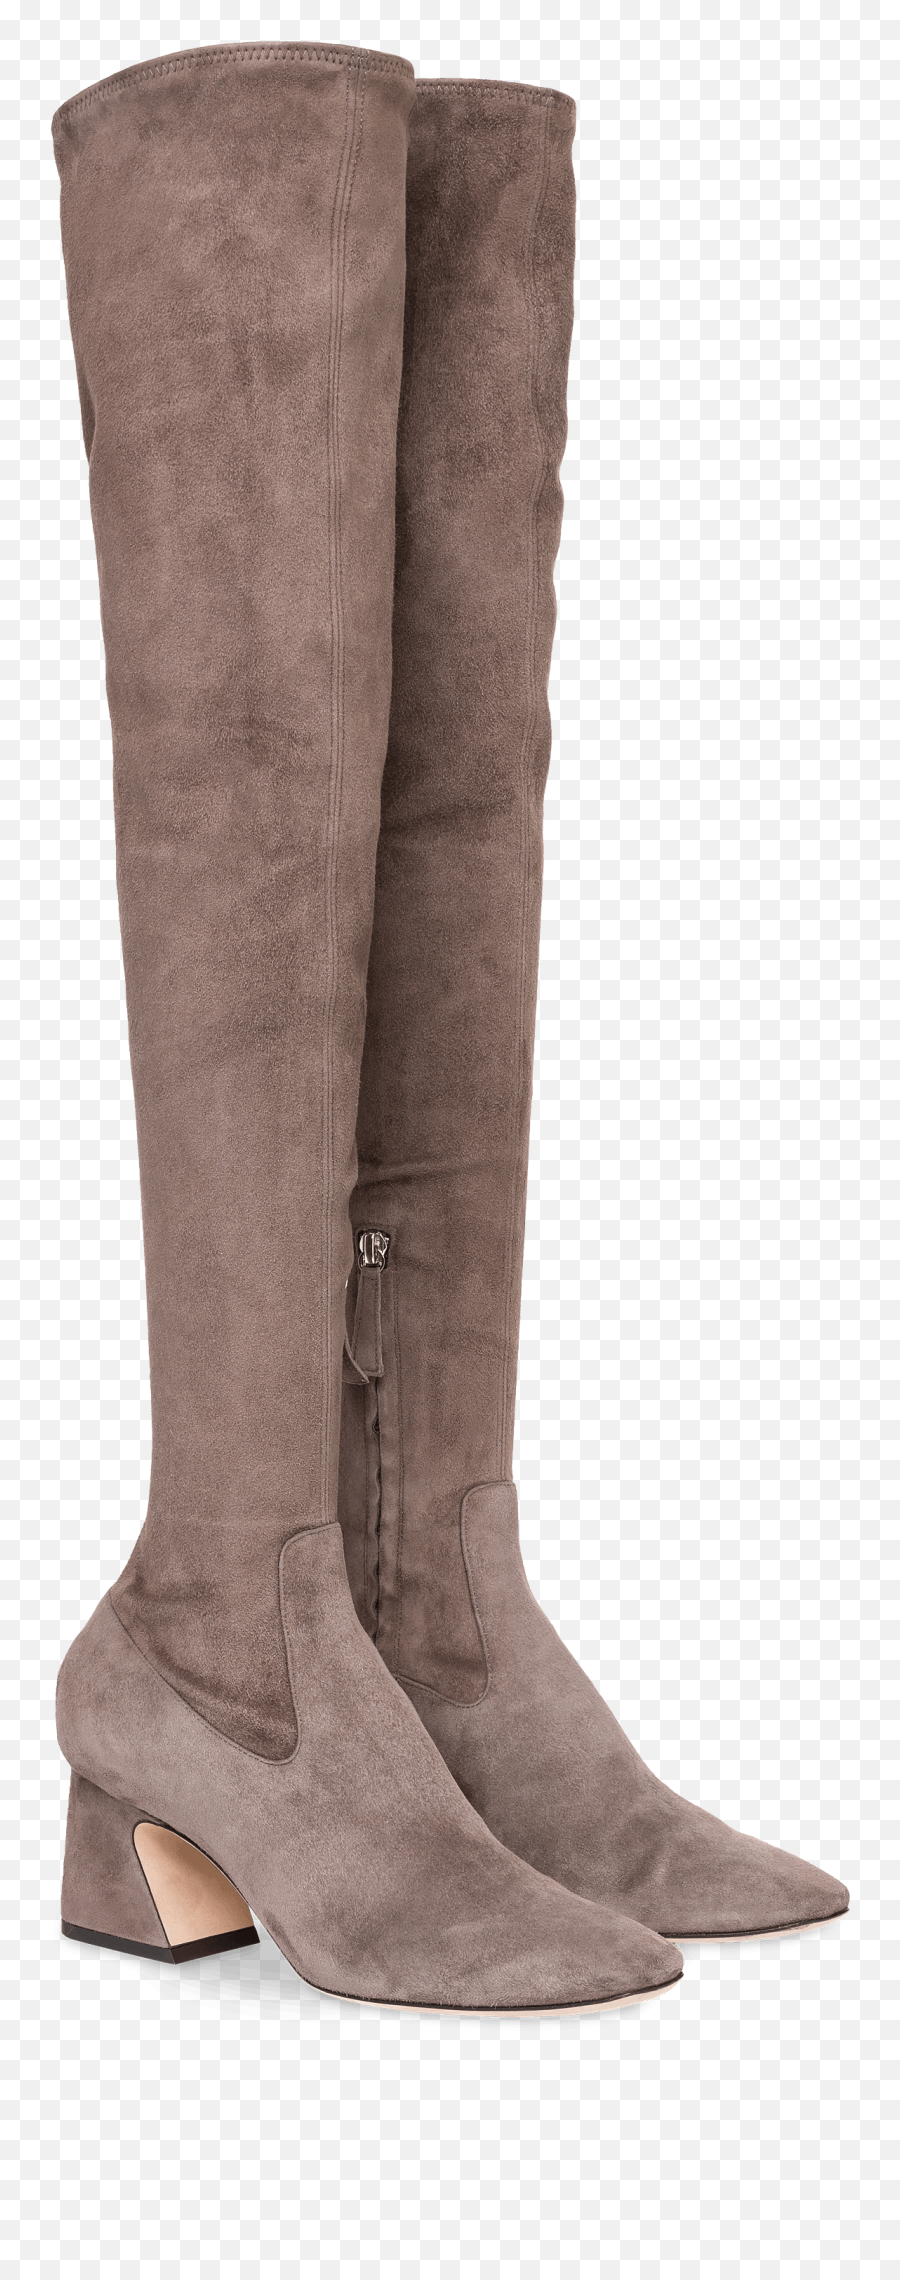 Taupe Over The Knee Boots Off 79 - Round Toe Emoji,Steve Madden Over The Knee Boots Emotions